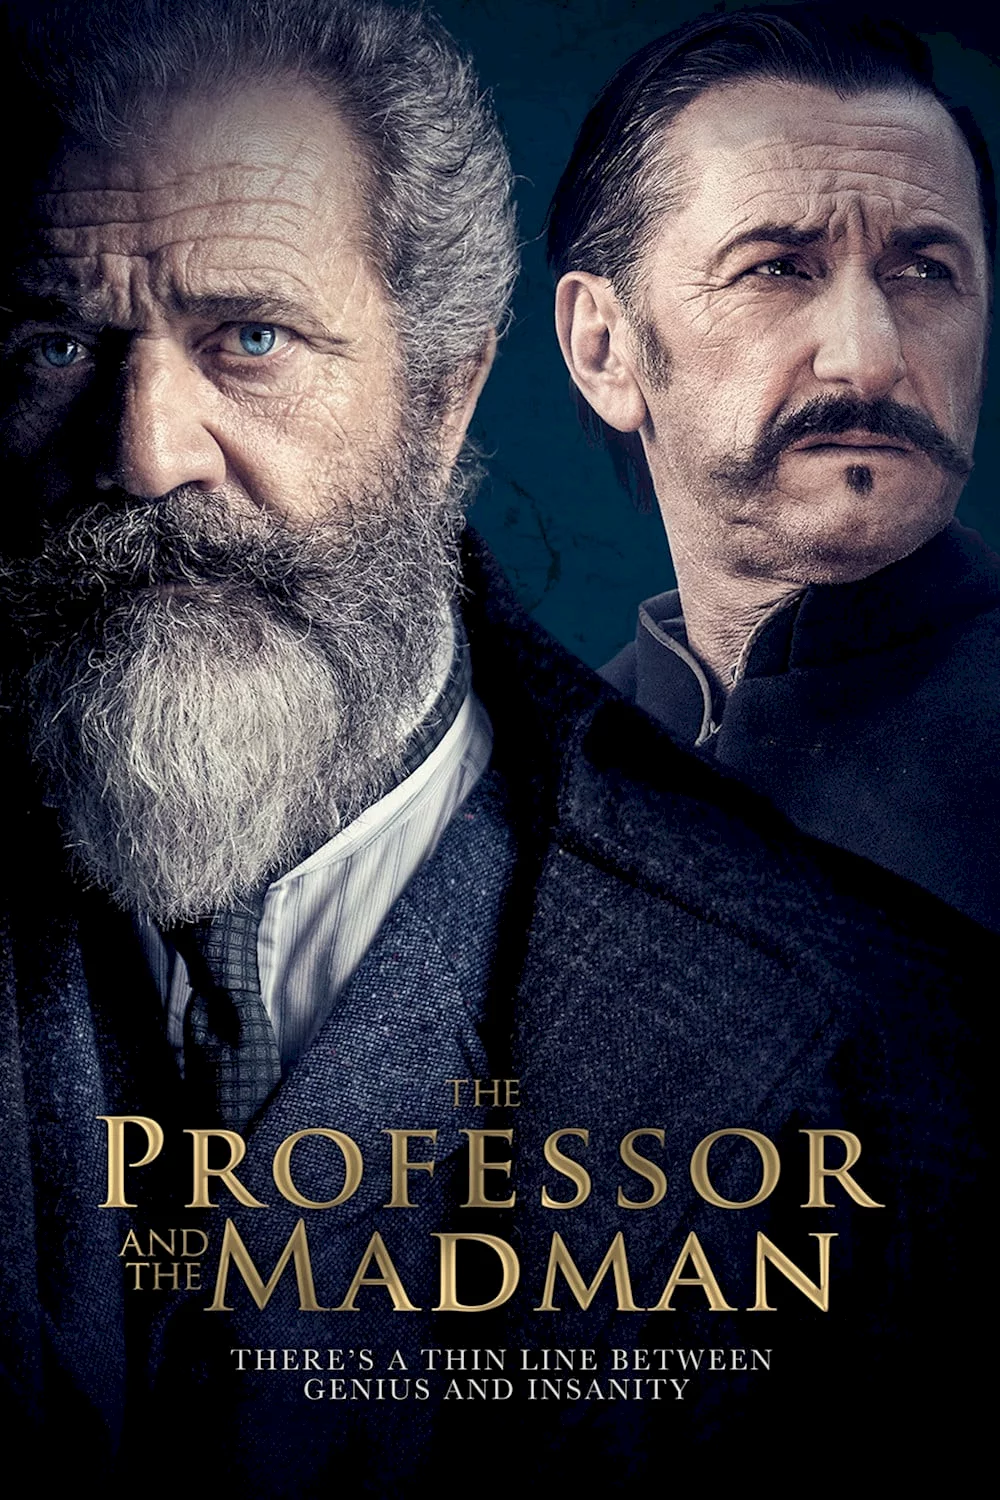 Photo 5 du film : The professor and the madman